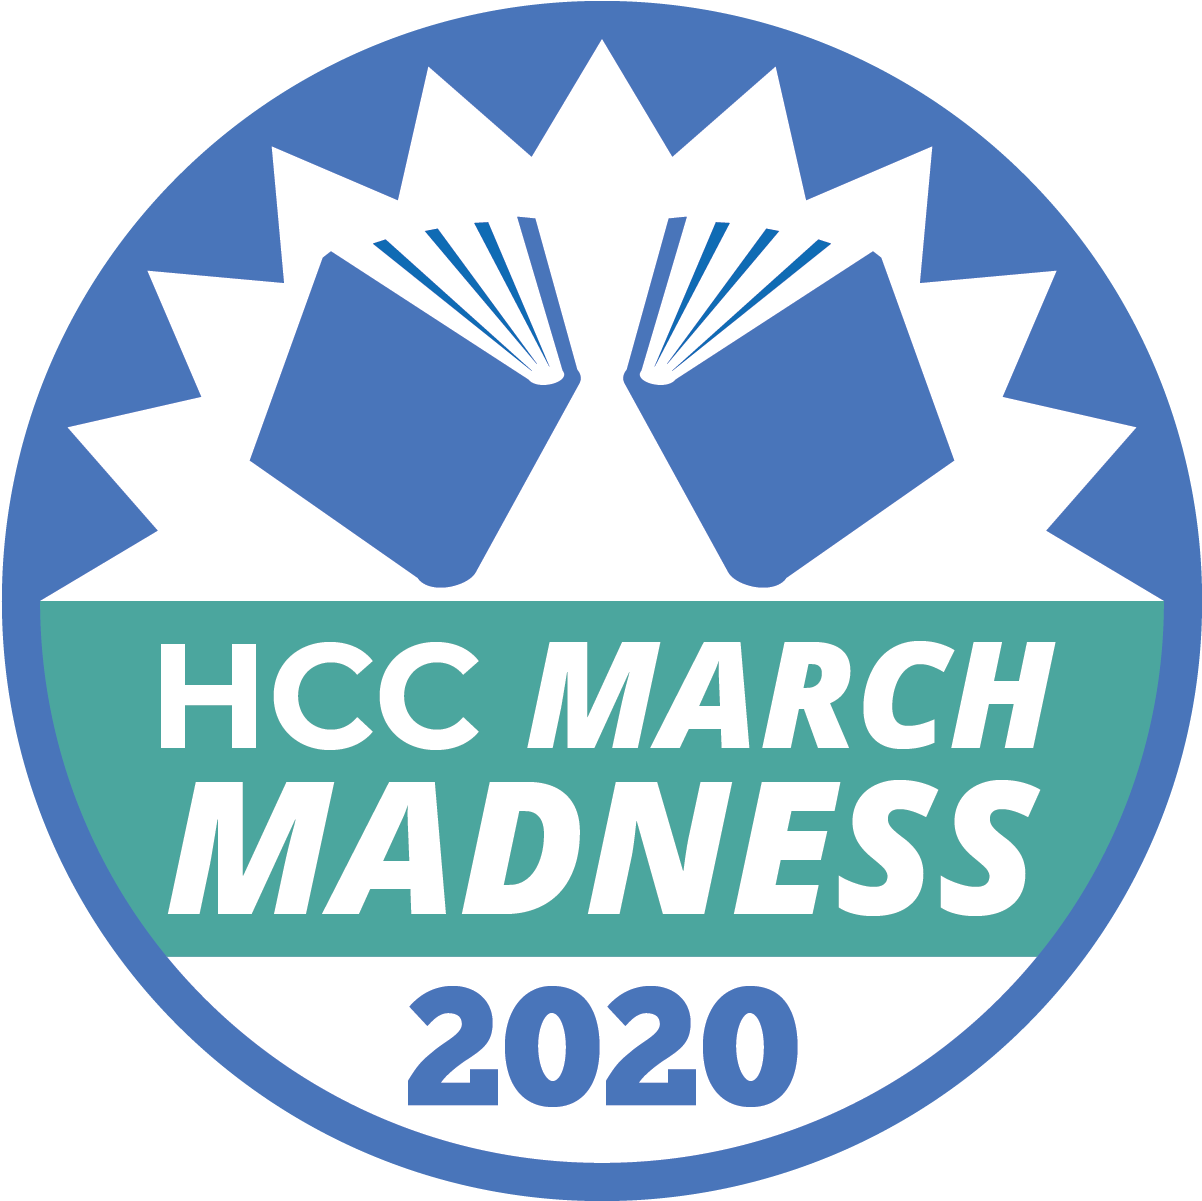 H C C March Madness2020 Logo PNG